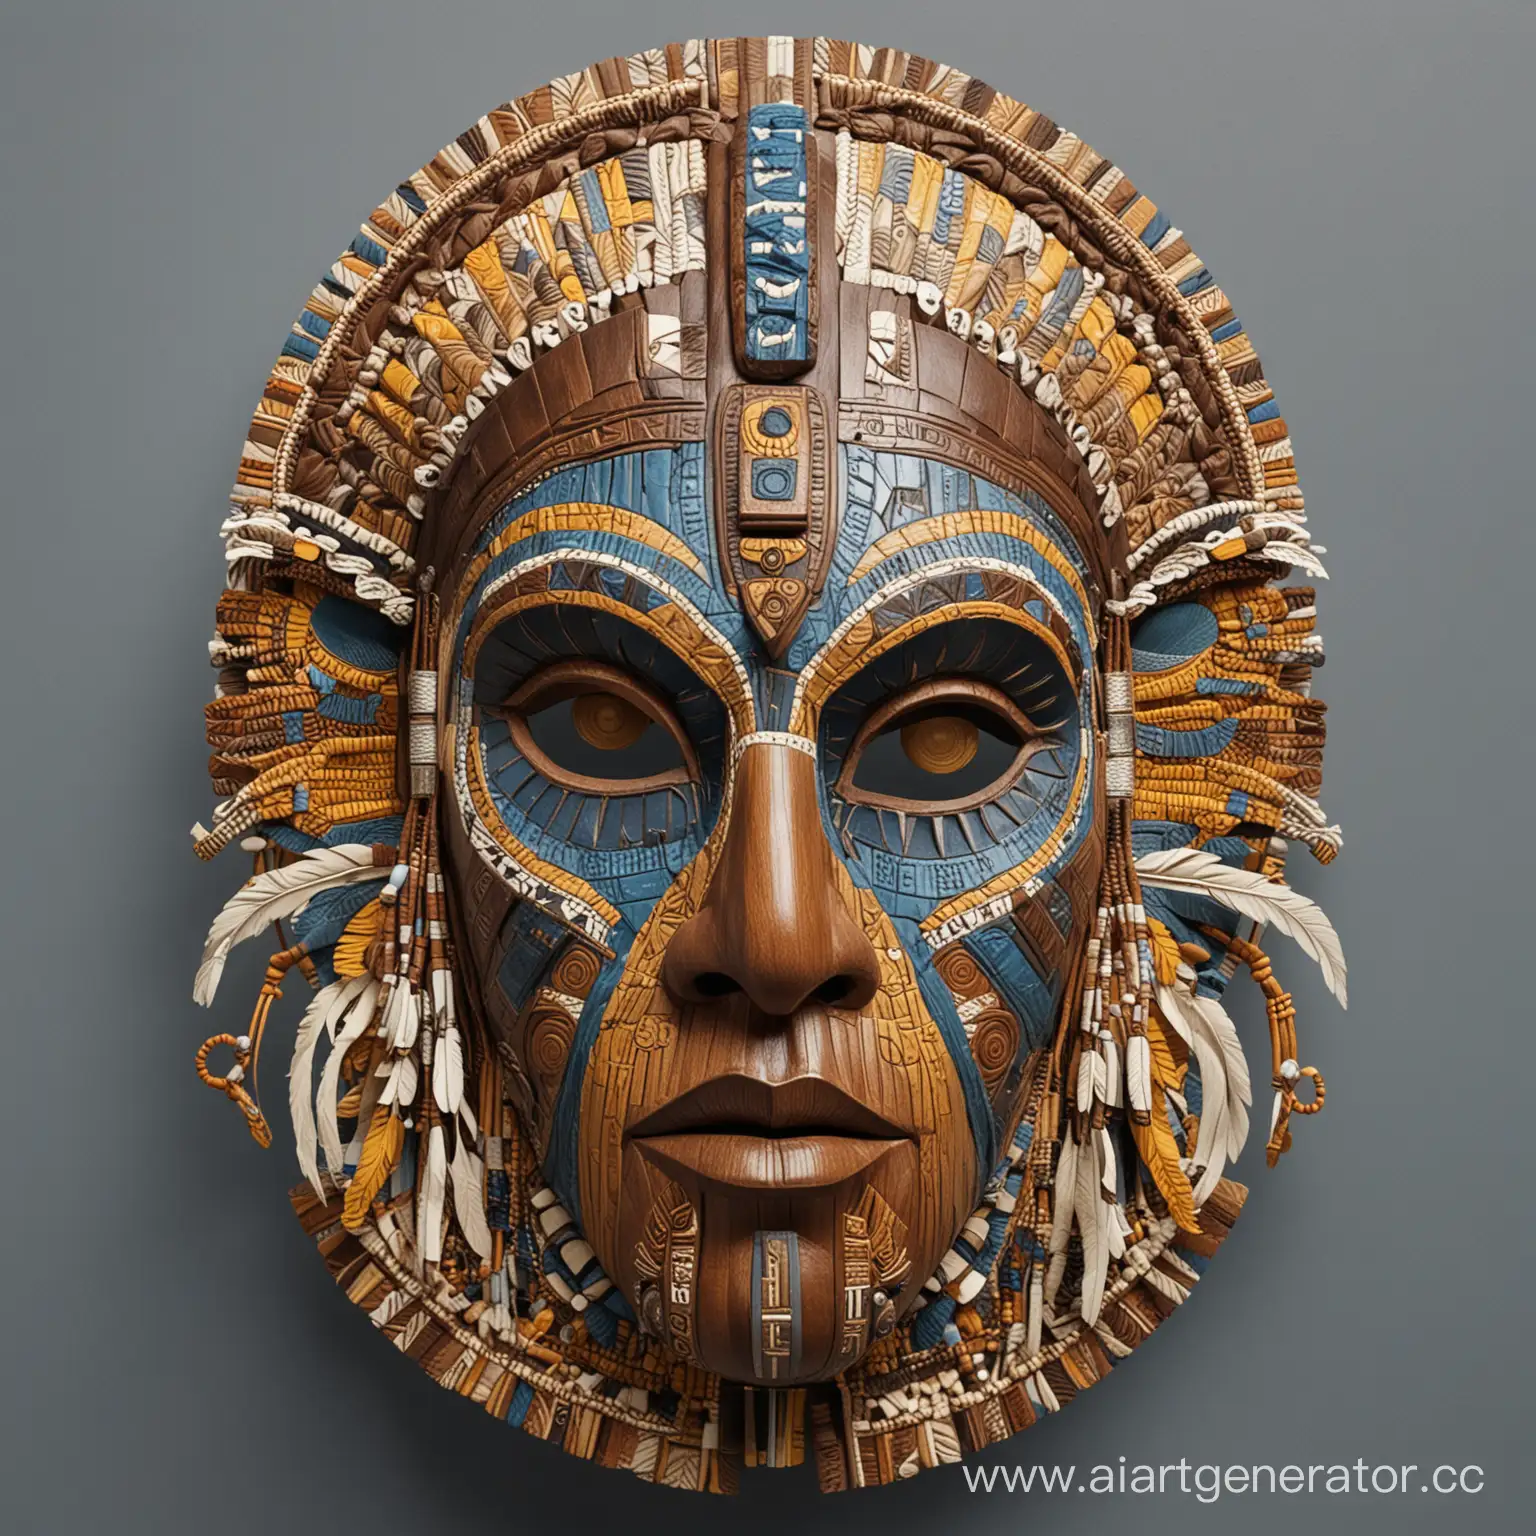 Australian-Aboriginal-Masks-Intricate-Fanciful-Ethnic-Style-with-Detailed-Brown-Yellow-Blue-and-White-Color-Palette